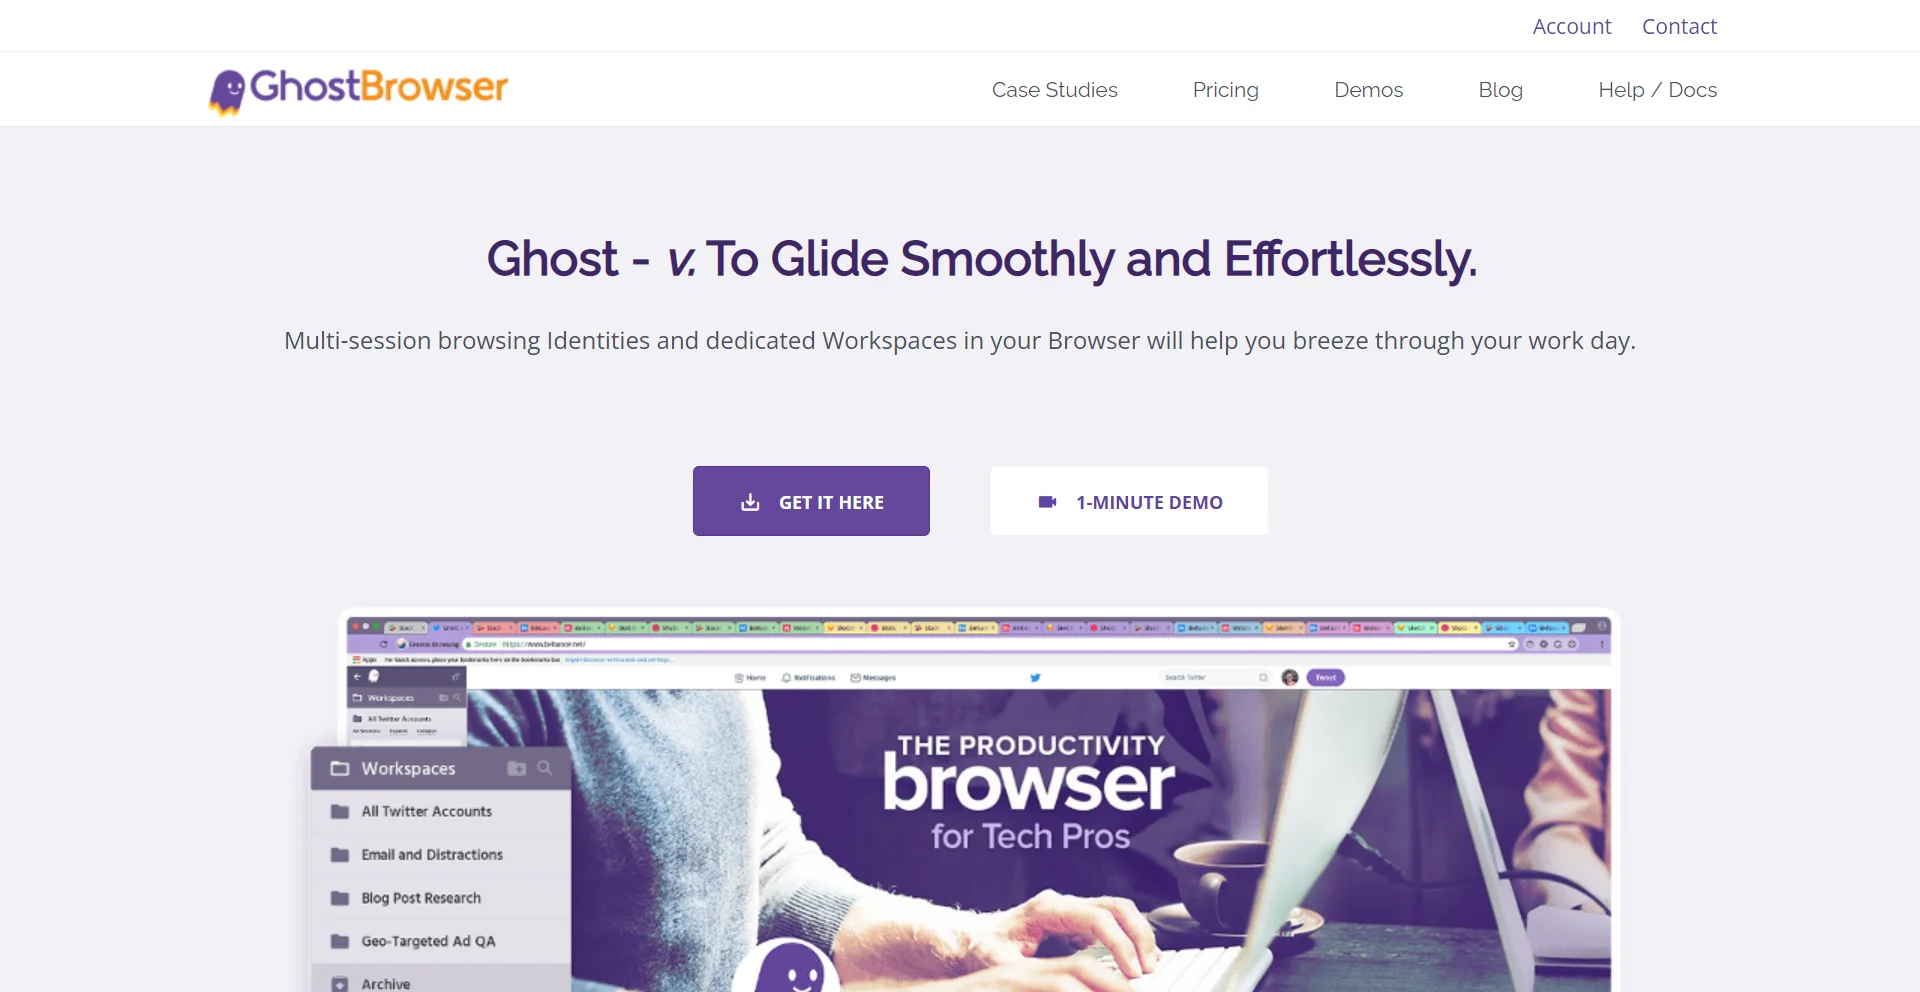 Ghost Browser